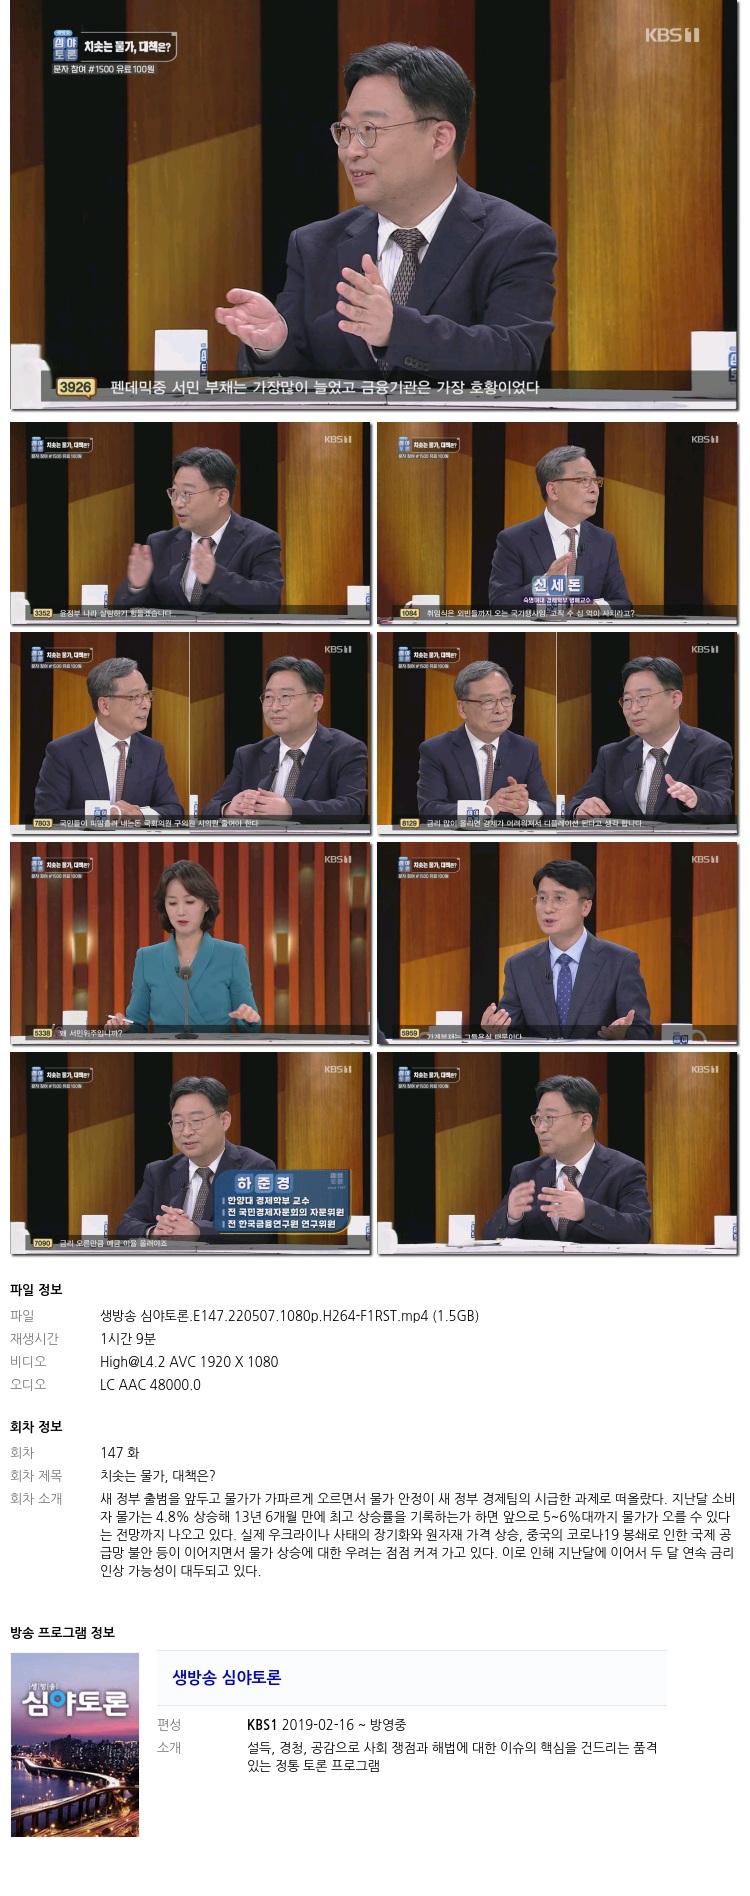 <img src="//img.filesun.com/common/diskview/ico_alliance_32x17.png" class="allianceicon" width="32" height="17" />
								                                                                [생방송 심야토론] EP.147화.220507.1080p